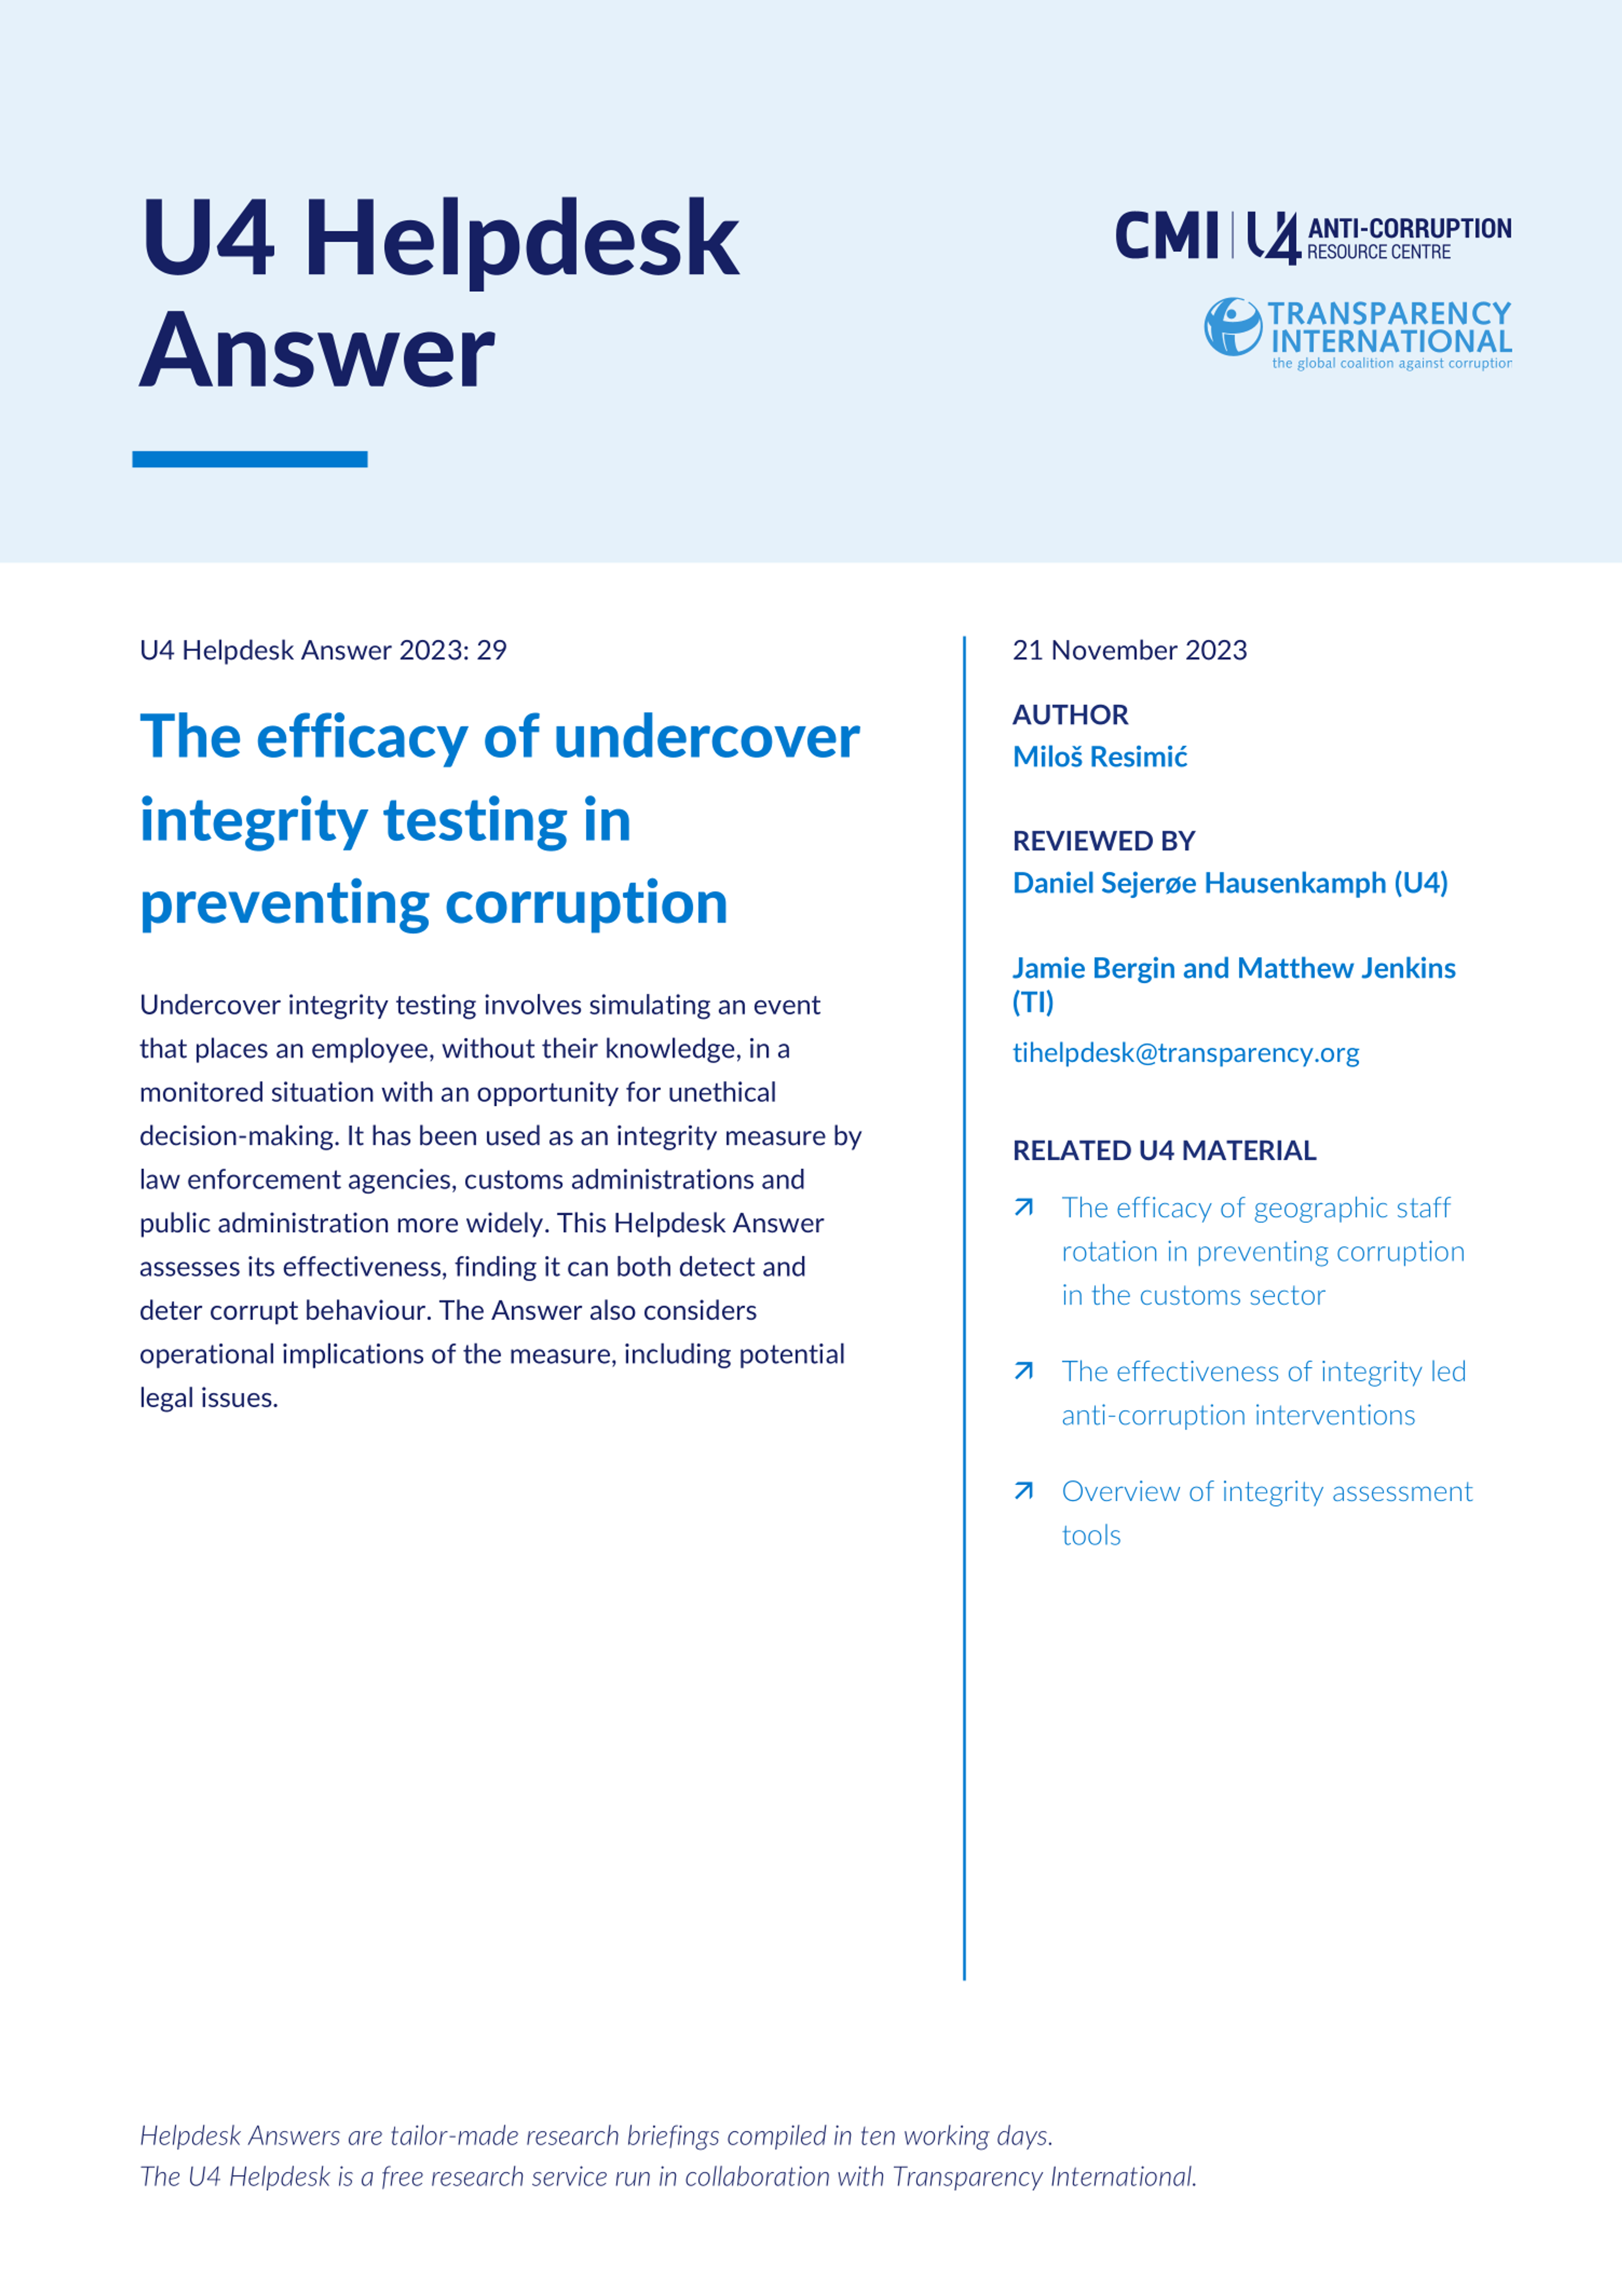 The efficacy of undercover integrity testing in preventing corruption